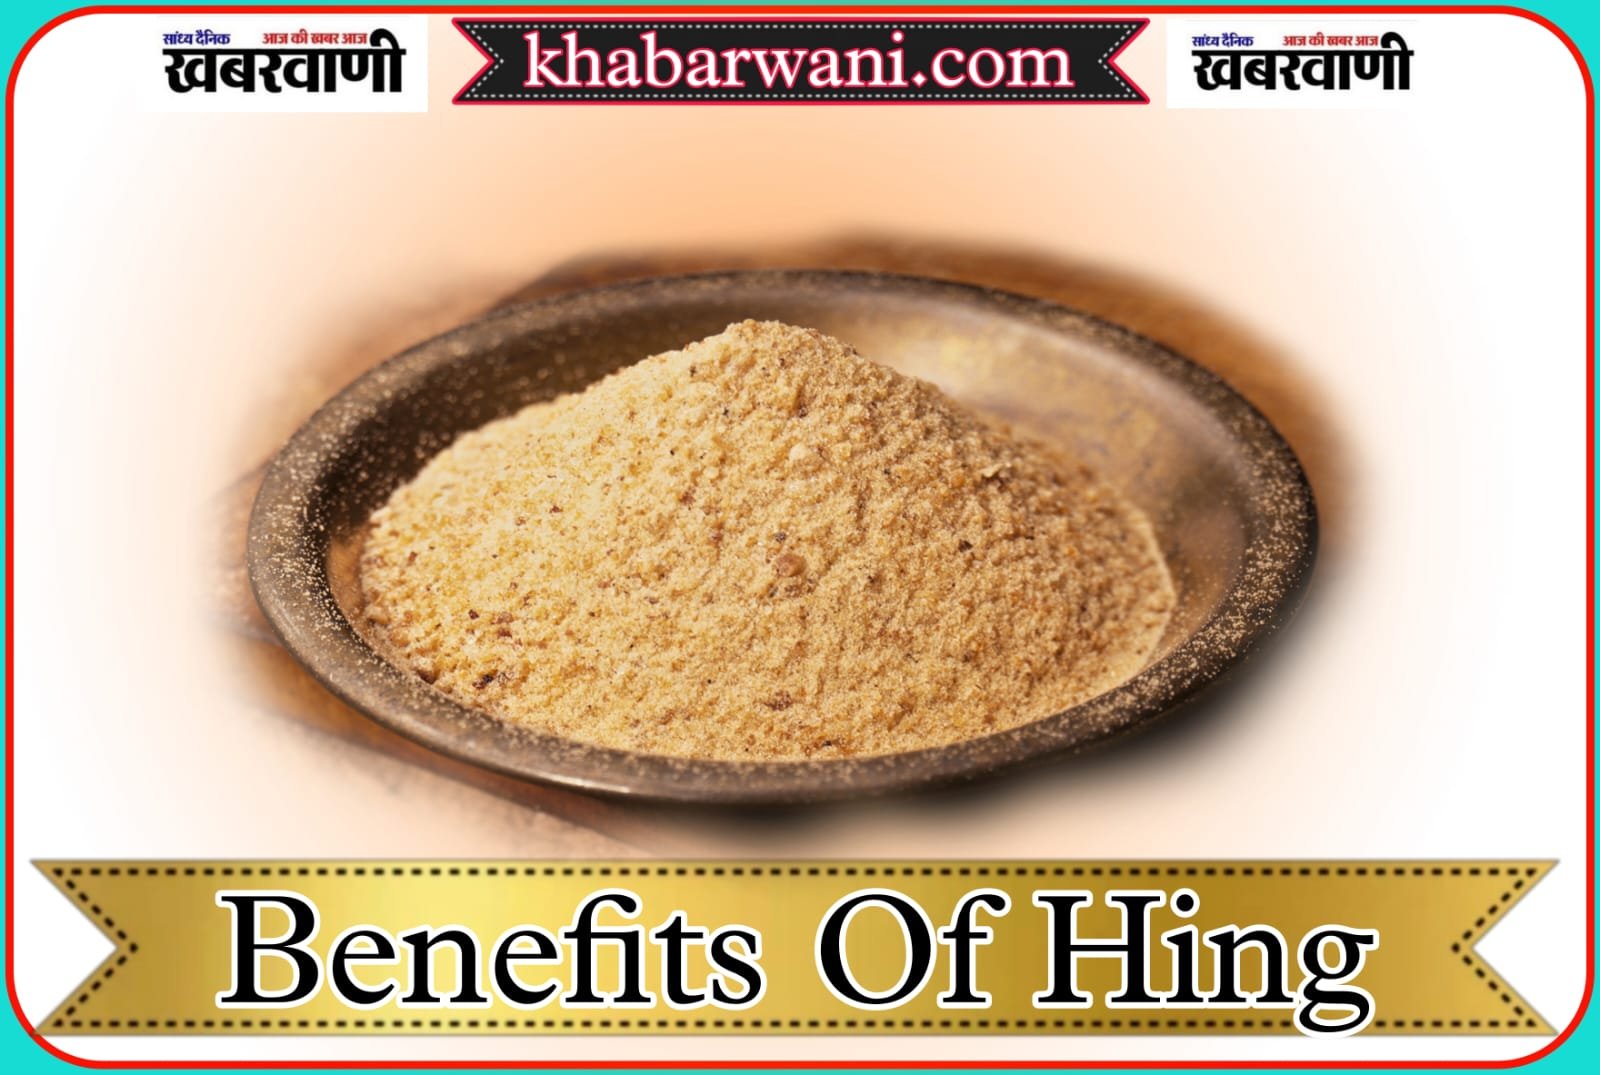 Benefits Of Hing - Asafoetida removes 3 problems instantly